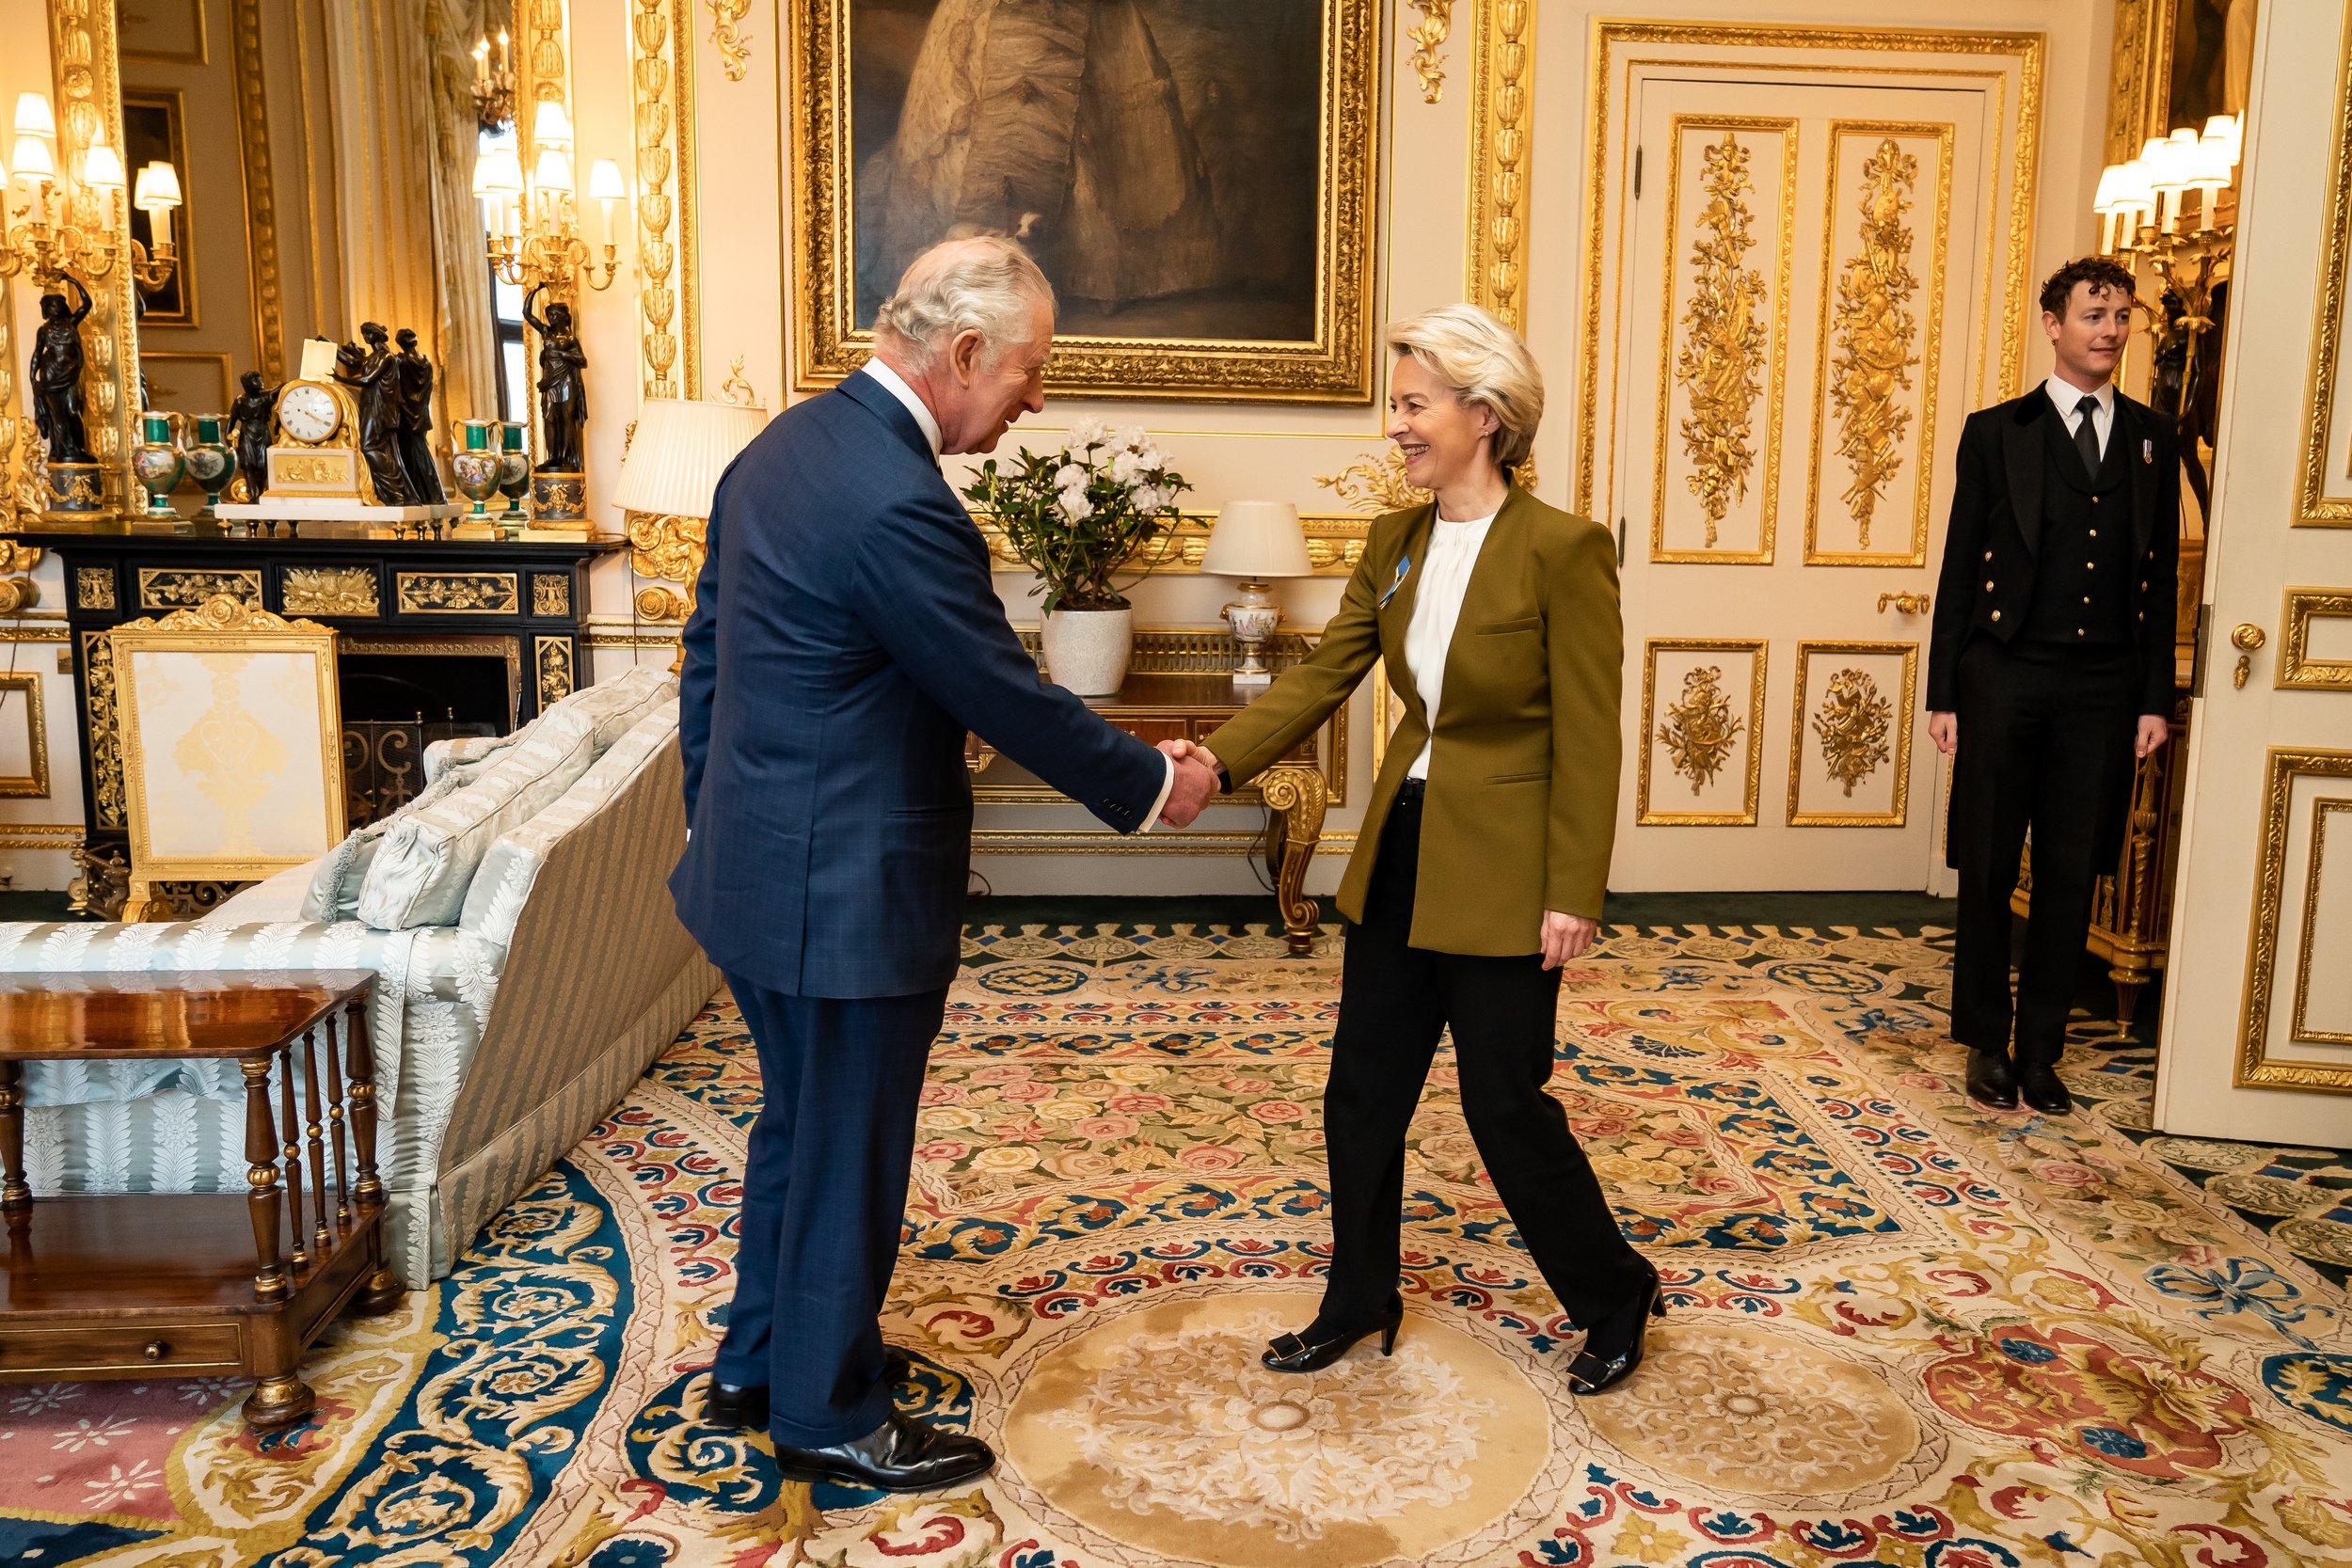  King Charles III receives European Commission president Ursula von der Leyen during an audience at Windsor Castle, Berkshire. Picture date: Monday February 27, 2023. Picture by: Aaron Chown/PA Wire/PA Images 